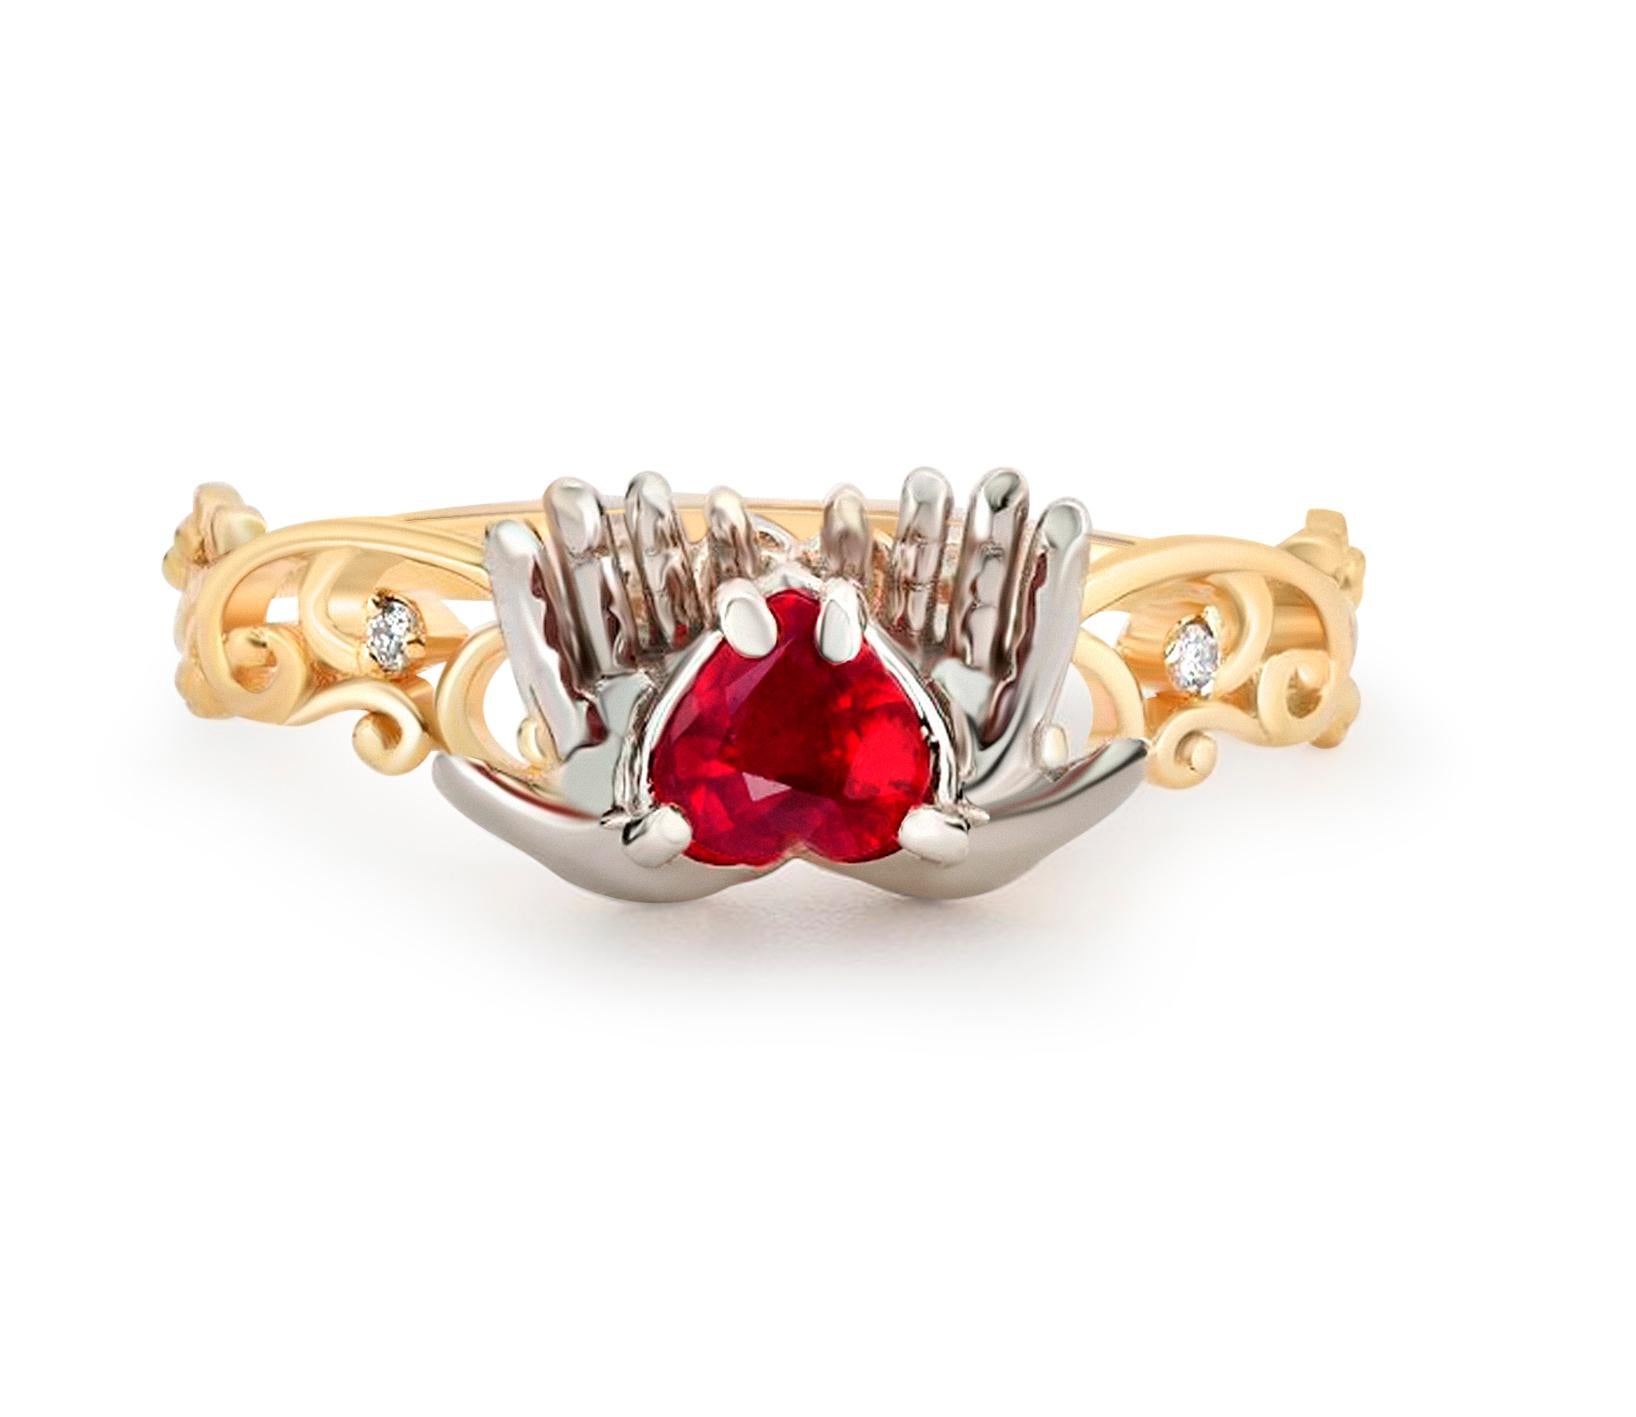 Ruby heart in hands 14k gold ring. 
Heart ruby ring. July birthstone ring. Ruby engagement ring. Red heart in hands ring. Valentine day gift.

14 kt white and yellow gold.
Weight: 2.10 g. depends from size.

Set with ruby, color - red
Heart cut,